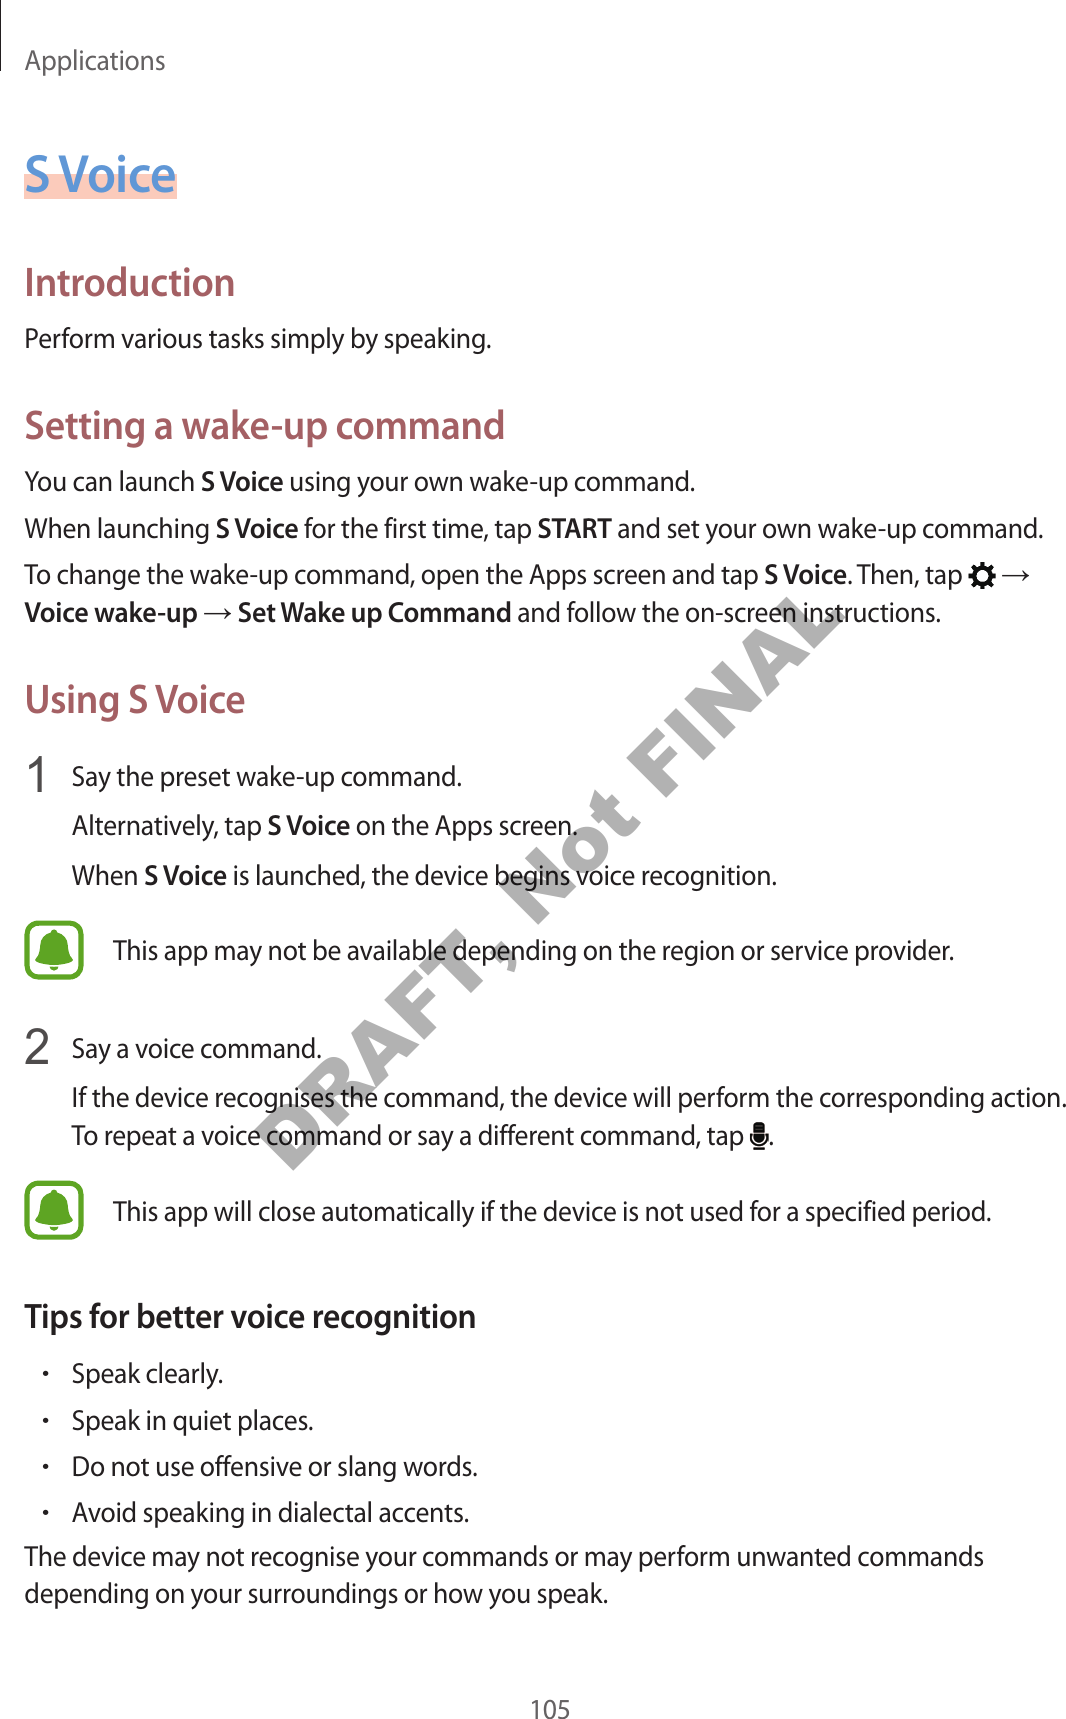 Applications105S VoiceIntroductionPerform various tasks simply by speaking.Setting a wake-up commandYou can launch S Voice using your own wake-up command.When launching S Voice for the first time, tap START and set your own wake-up command.To change the wake-up command, open the Apps screen and tap S Voice. Then, tap   ĺ Voice wake-up ĺ Set Wake up Command and follow the on-screen instructions.Using S Voice1  Say the preset wake-up command.Alternatively, tap S Voice on the Apps screen.When S Voice is launched, the device begins voice recognition.This app may not be available depending on the region or service provider.2  Say a voice command.If the device recognises the command, the device will perform the corresponding action. To repeat a voice command or say a different command, tap  .This app will close automatically if the device is not used for a specified period.Tips for better voice recognition•Speak clearly.•Speak in quiet places.•Do not use offensive or slang words.•Avoid speaking in dialectal accents.The device may not recognise your commands or may perform unwanted commands depending on your surroundings or how you speak.DRAFT, Not FINAL